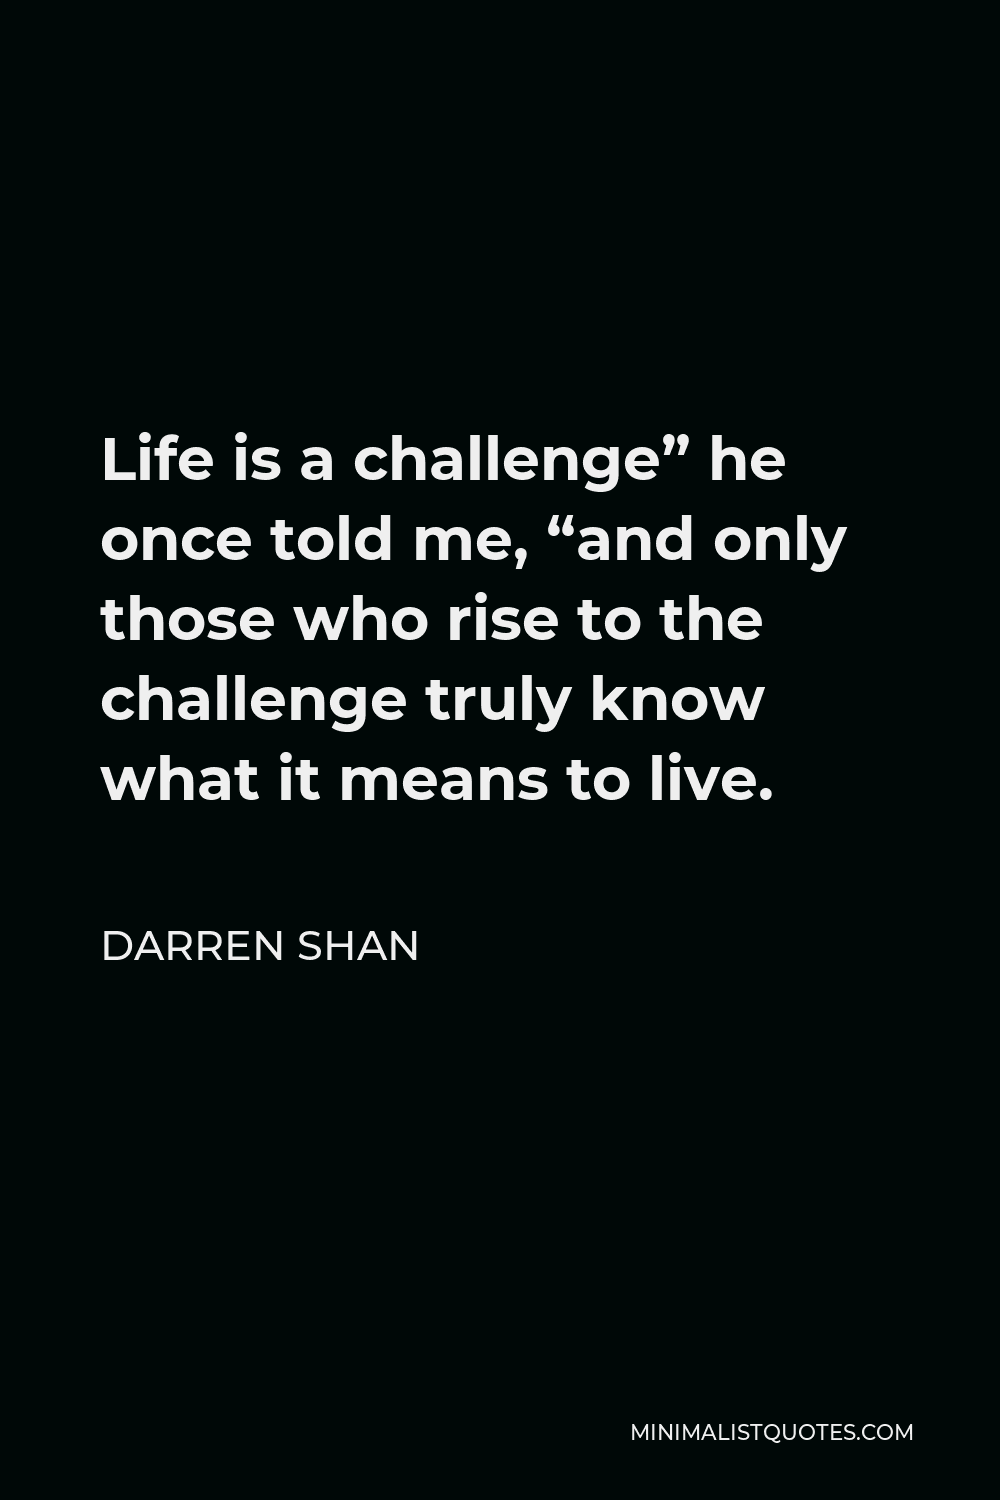 Darren Shan Quote - Life is a challenge” he once told me, “and only those who rise to the challenge truly know what it means to live.